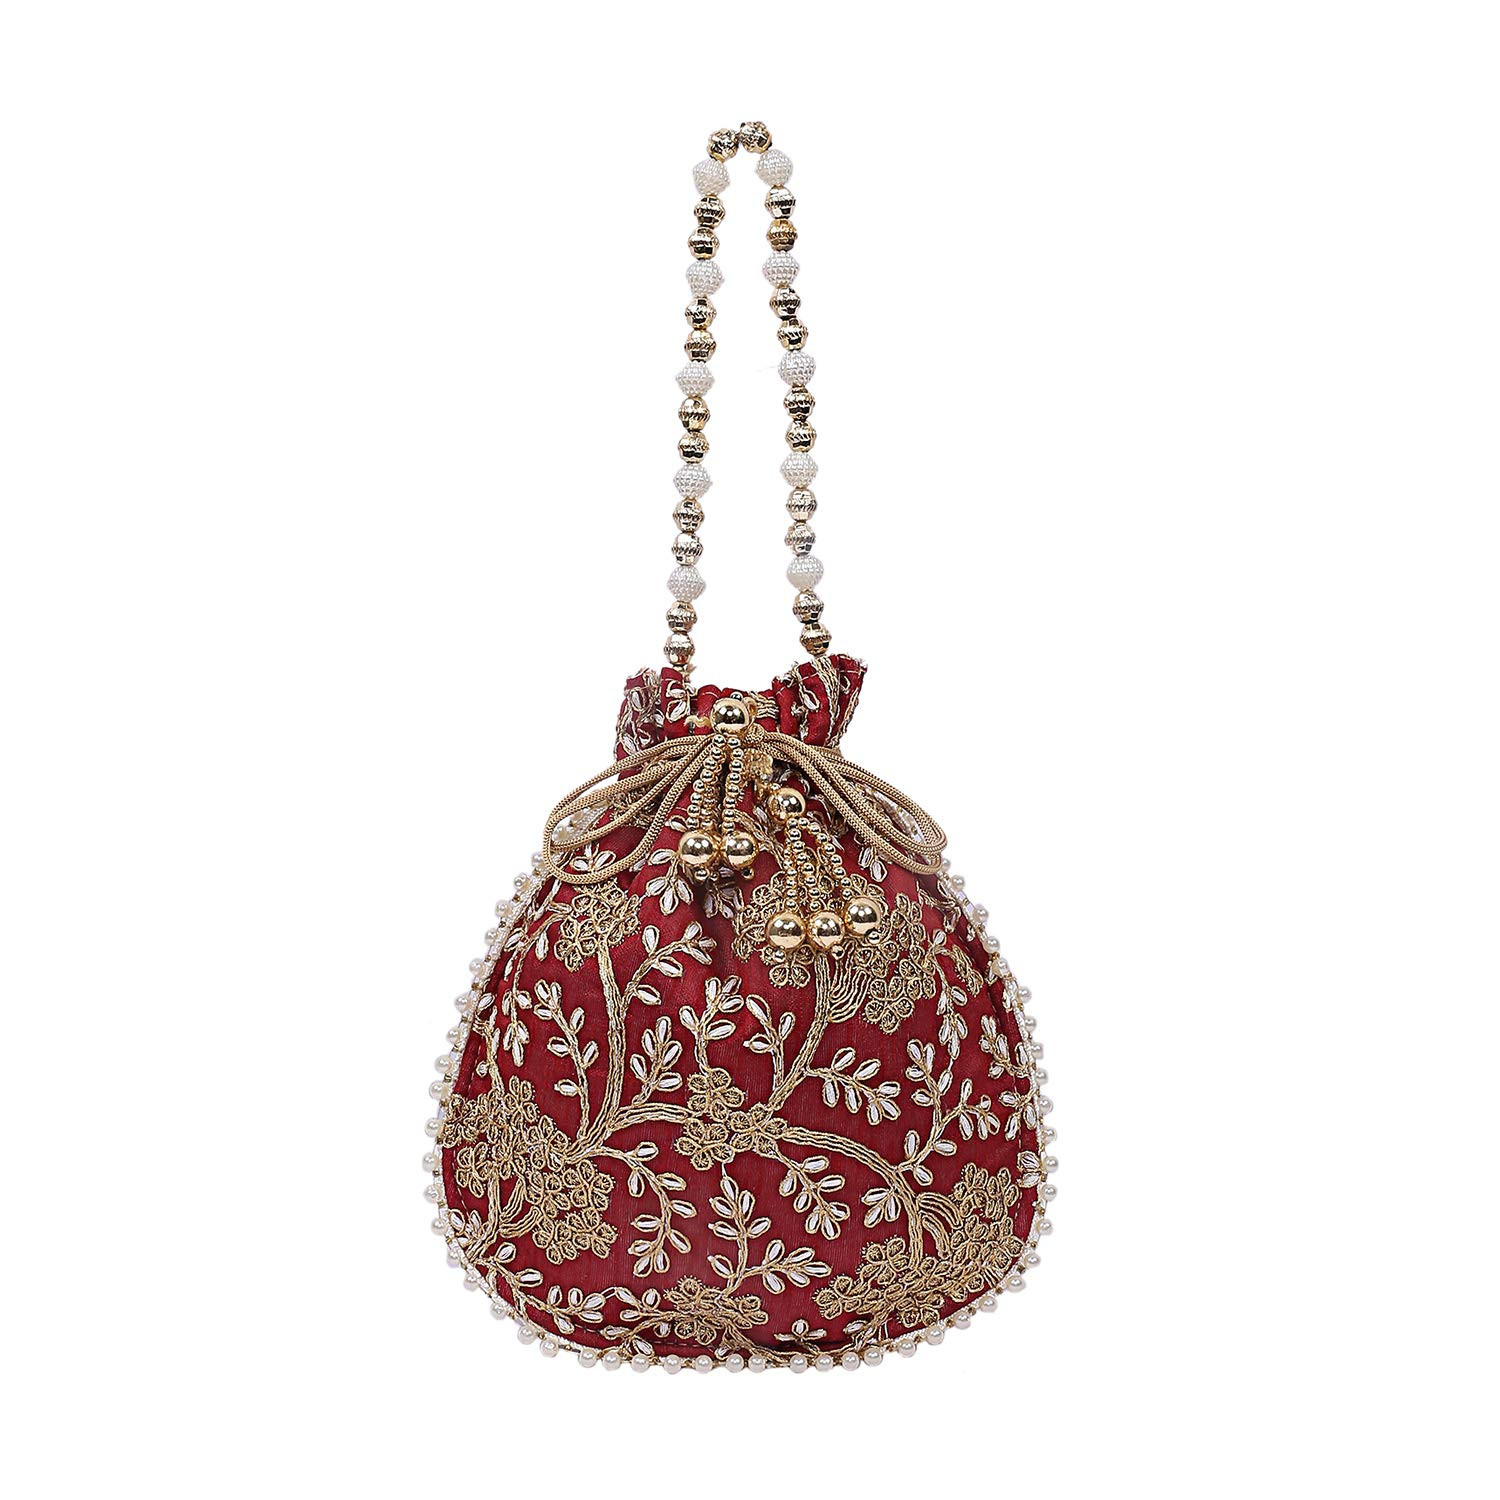 Kuber Industries Embroidery Drawstring Potli|Hand Purse With Gold Pearl Border & Handle For Woman,Girls (Maroon)